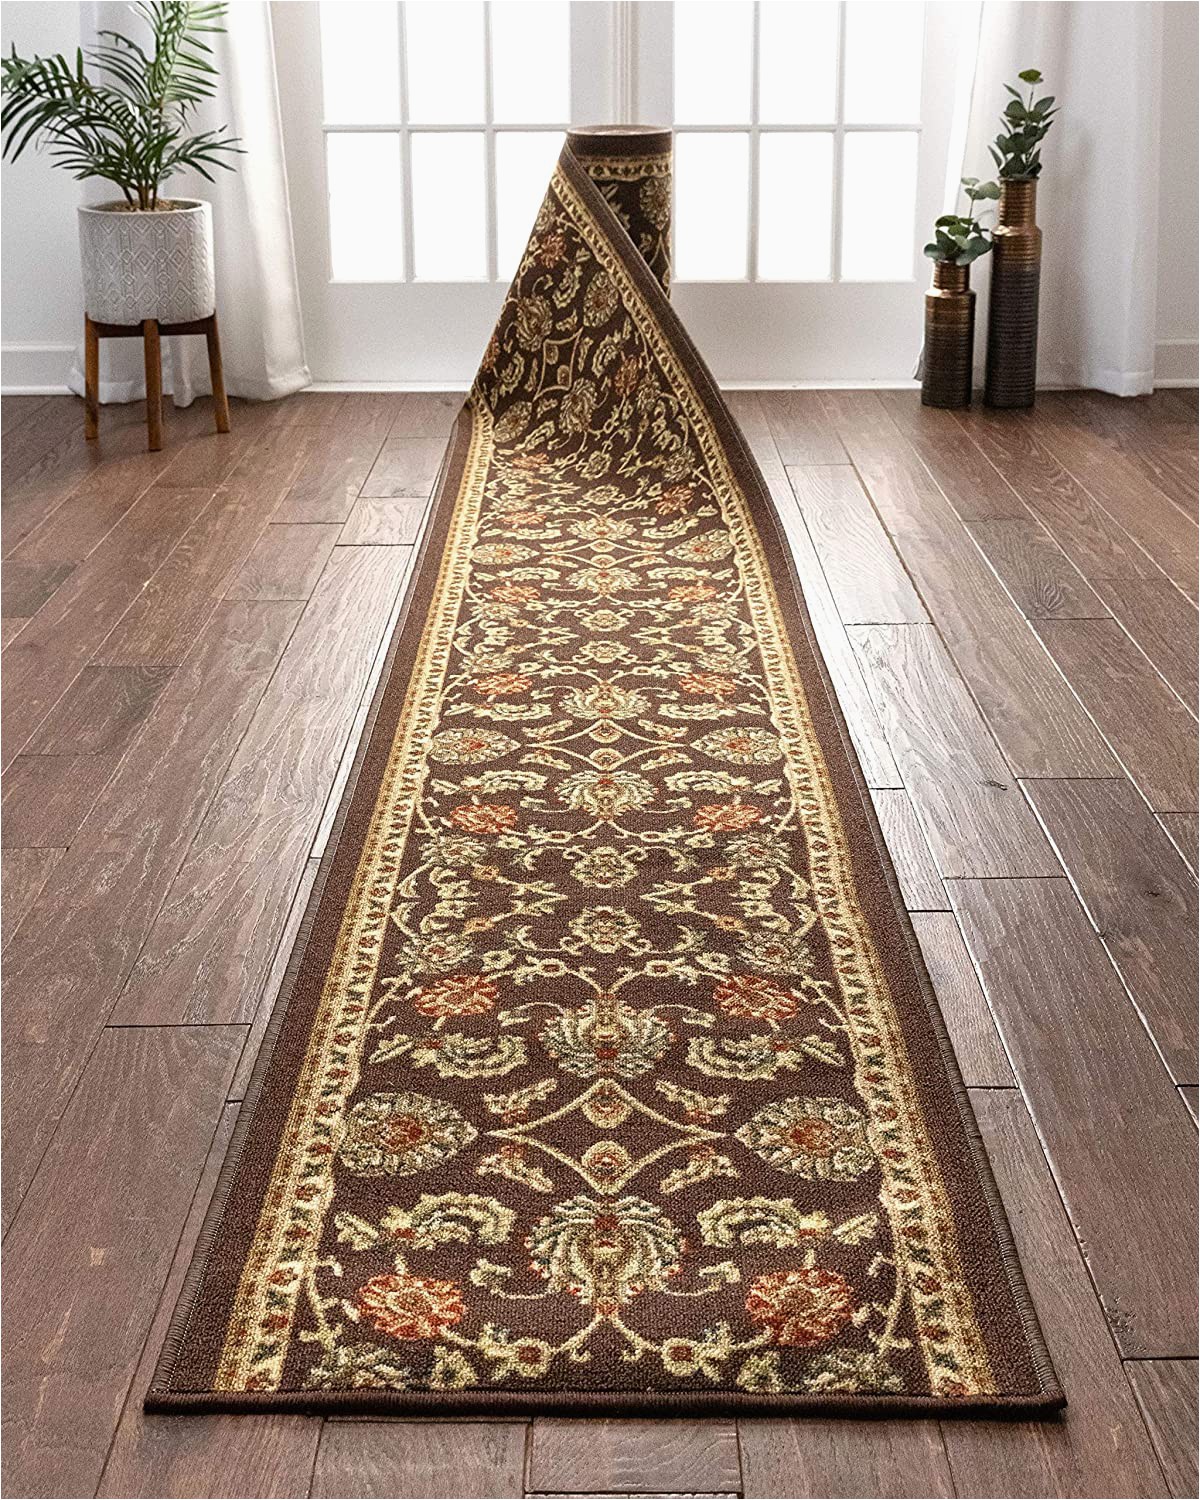 Bath Rug Runner 22 X 60 Well Woven Custom Size 22" Wide by Select Your Runner Length Non Slip Rubber Backed Machine Washable Halll Rug Timeless oriental Brown Indoor Outdoor